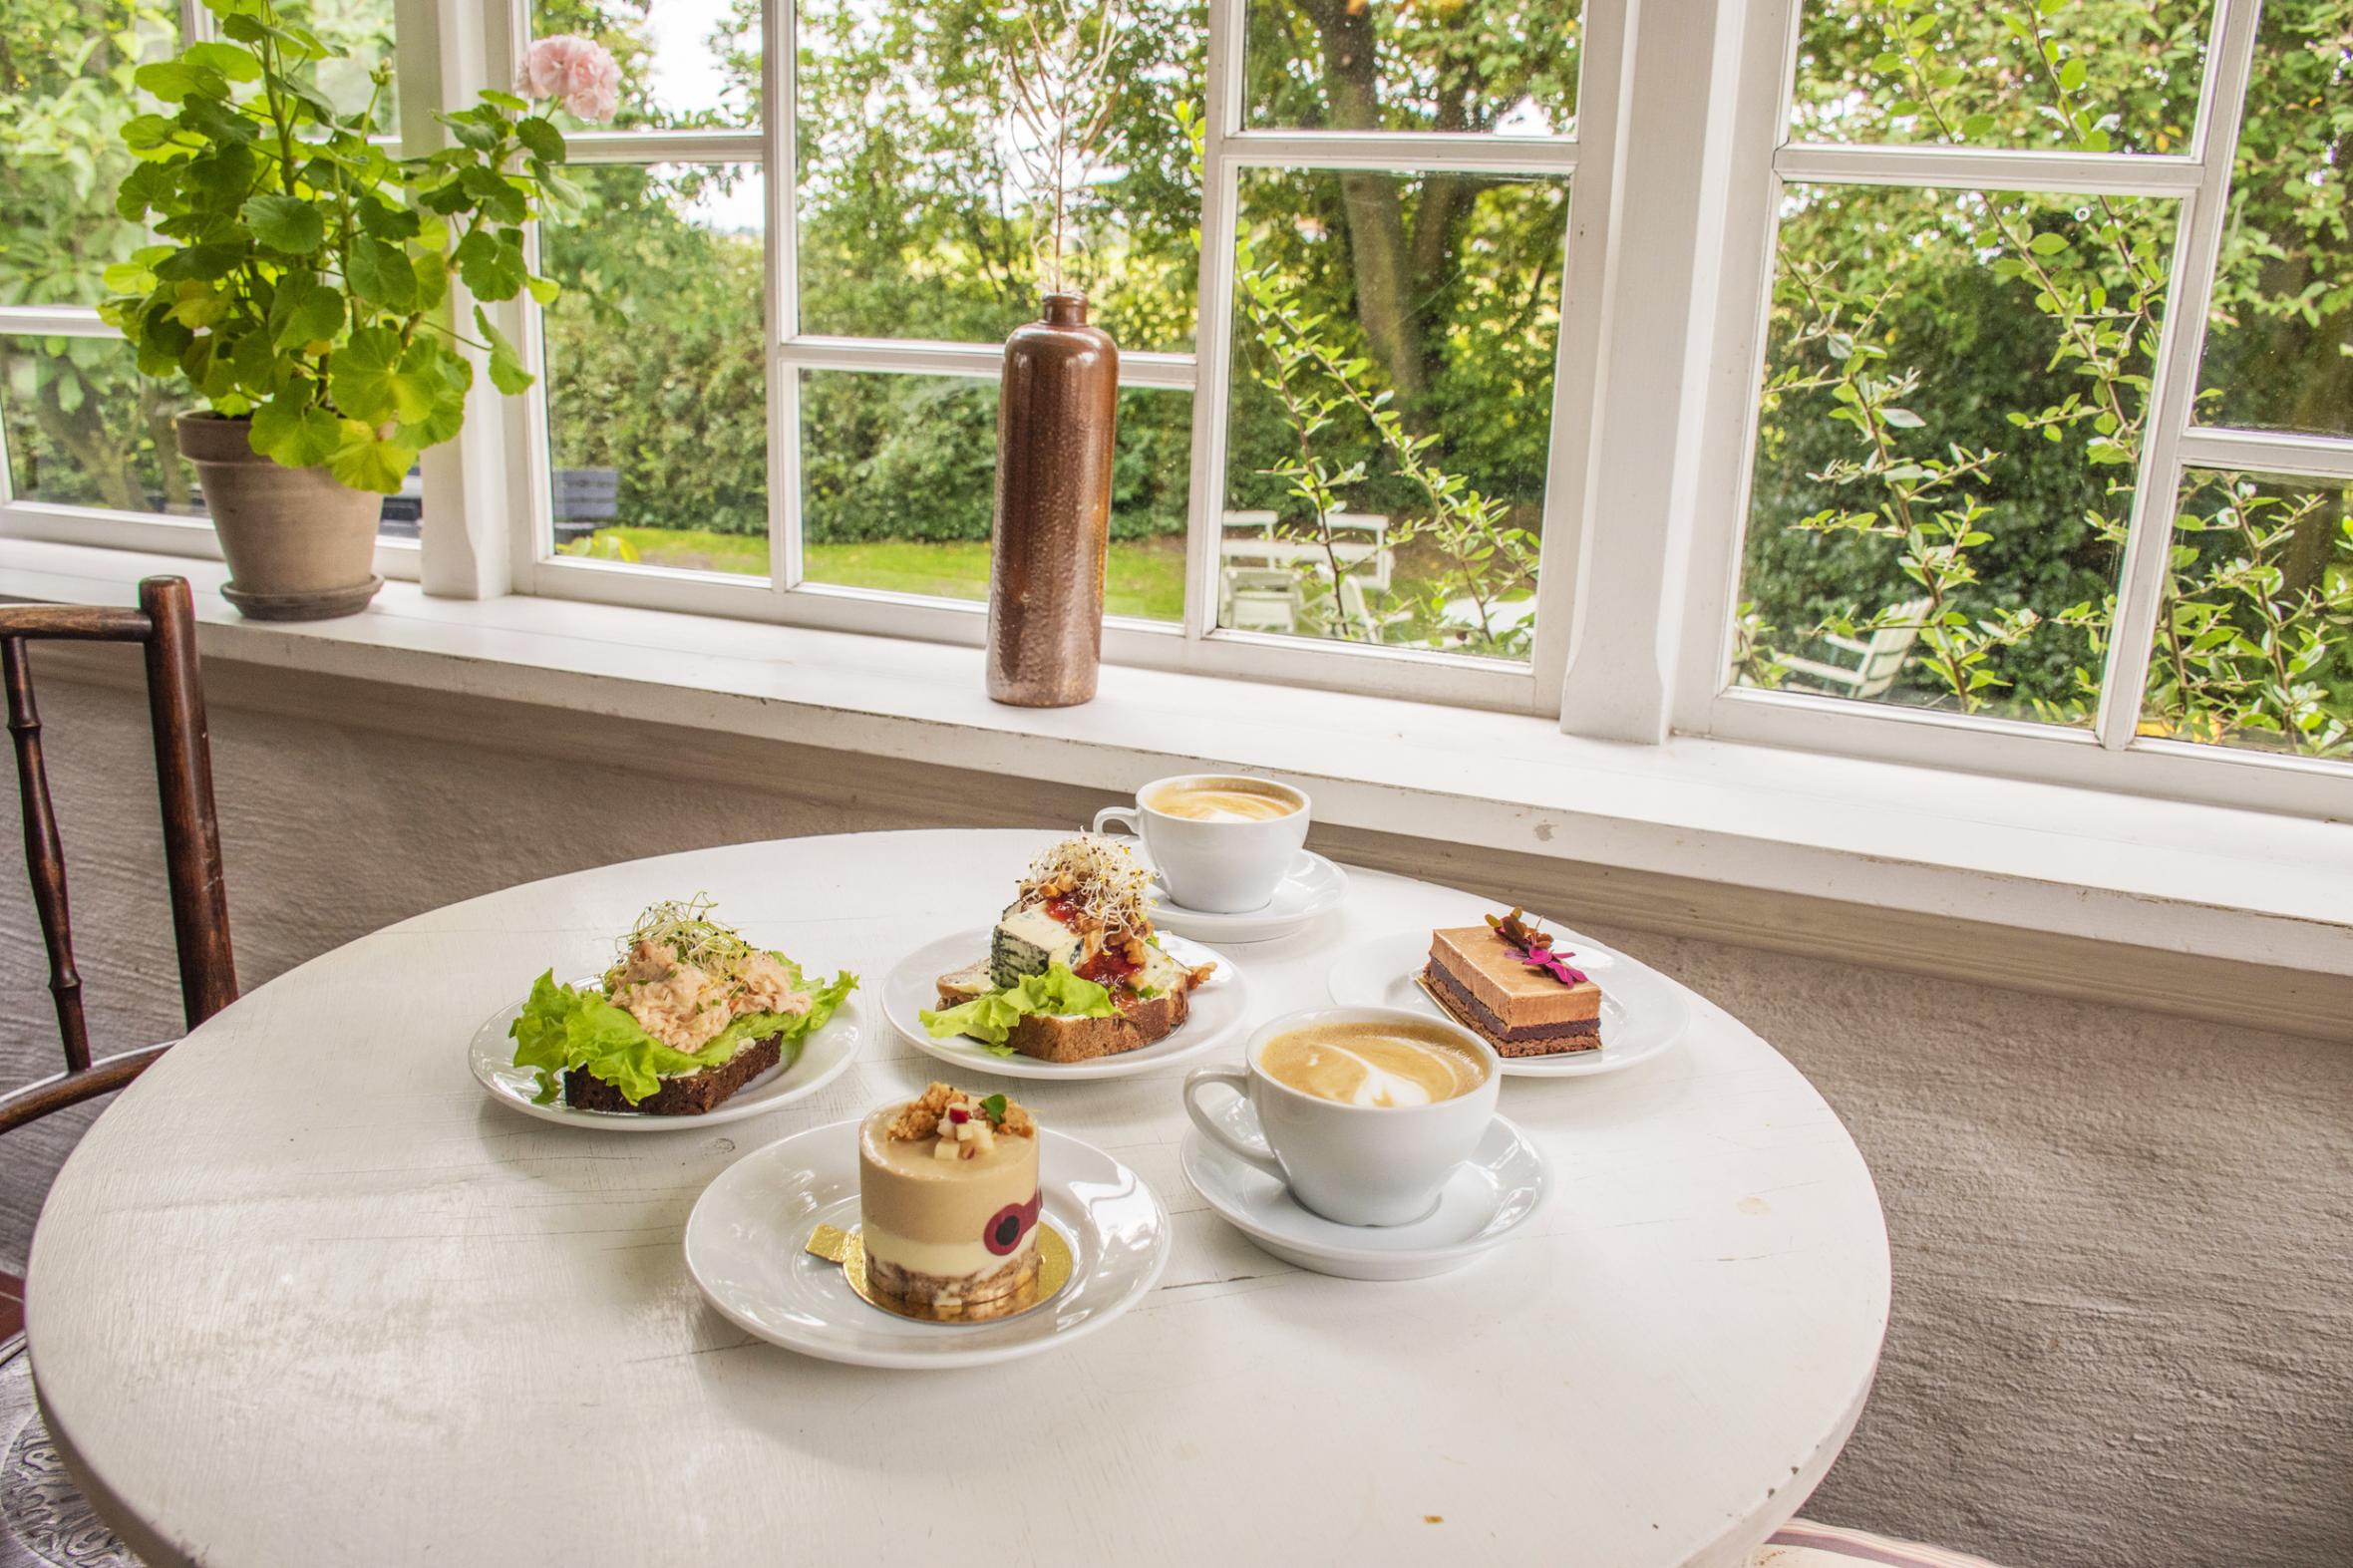 Plated pastries on a table in green garden surrounding